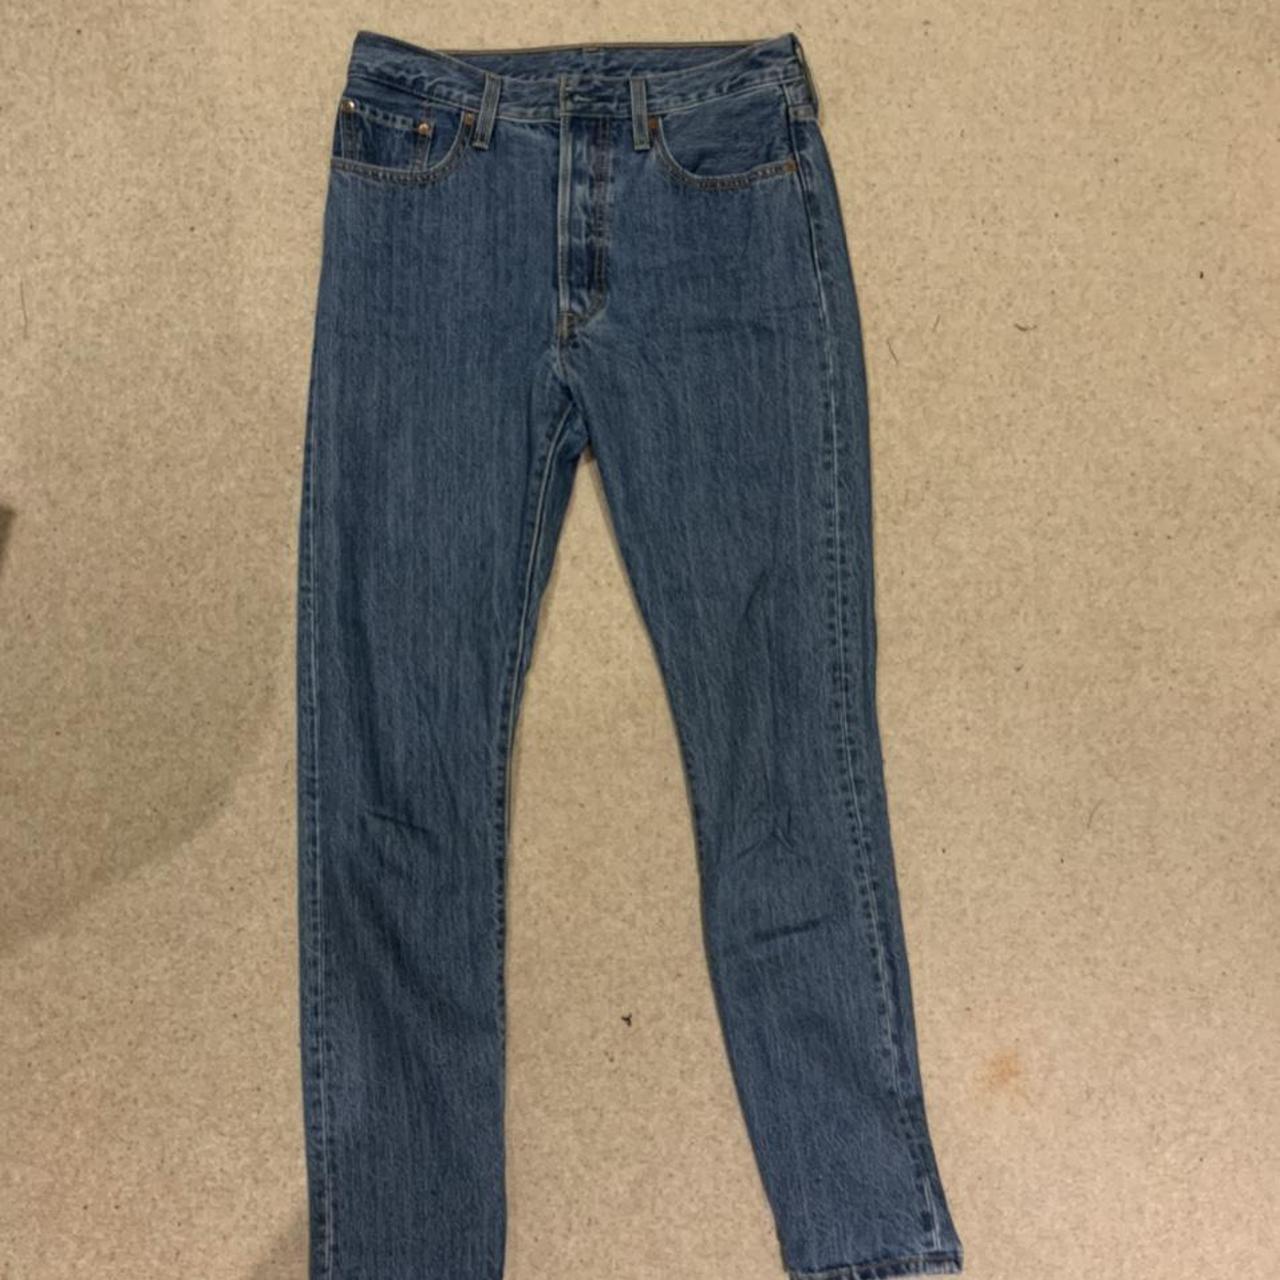 Levi’s 501 S women’s jeans. Skinny style with a... - Depop